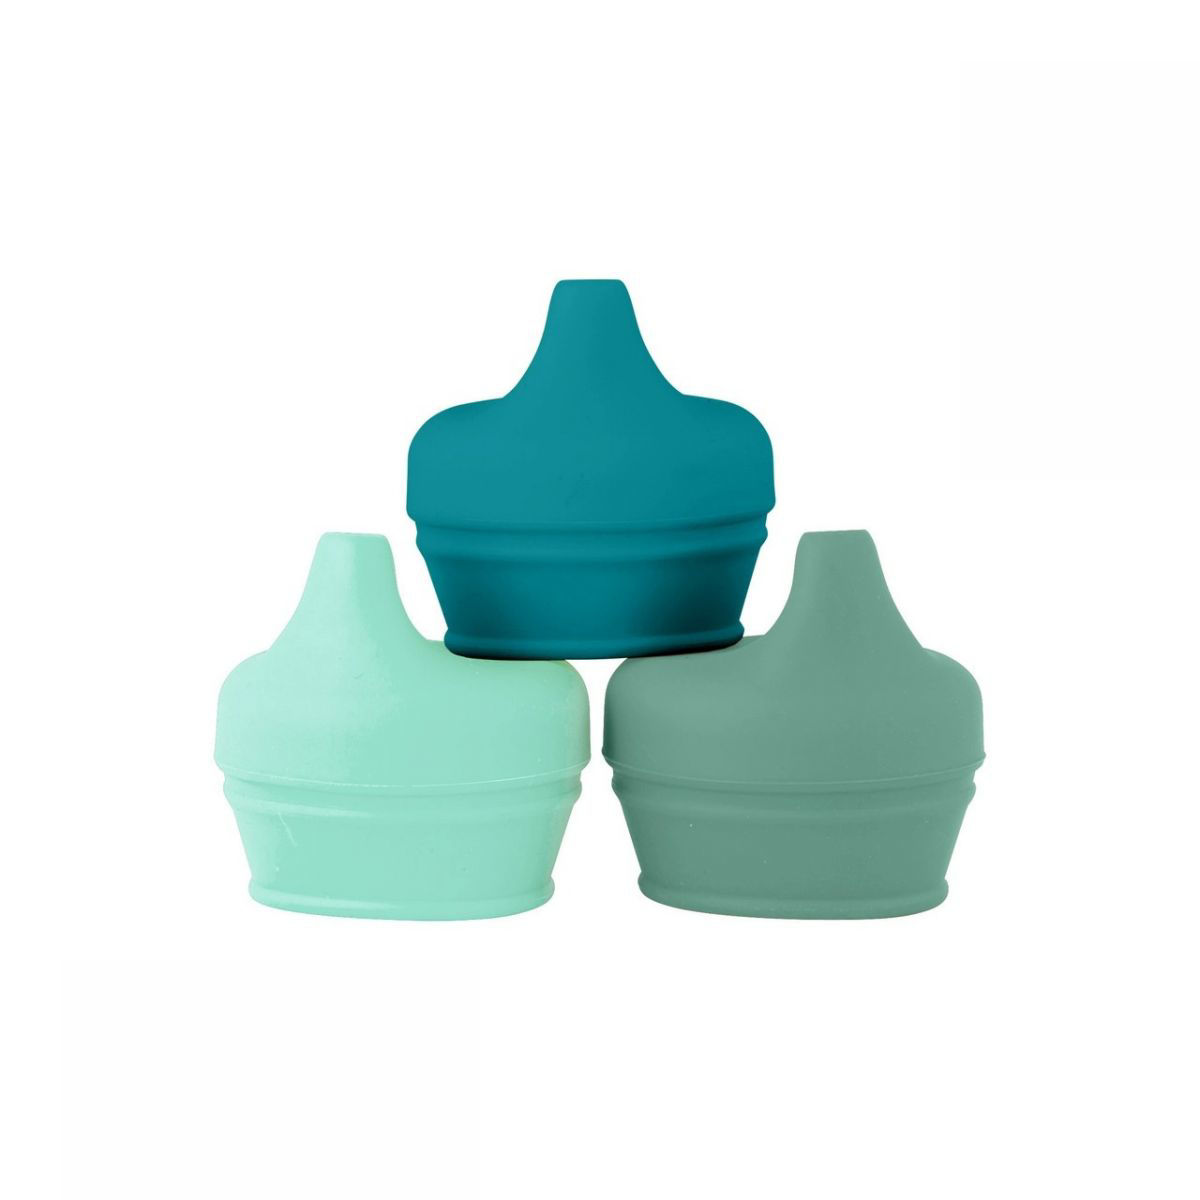 https://www.babyfurnitureplus.net/images/thumbs/0051498_snug-universal-silicone-sippy-lids-3-pack-green-by-boon.jpeg